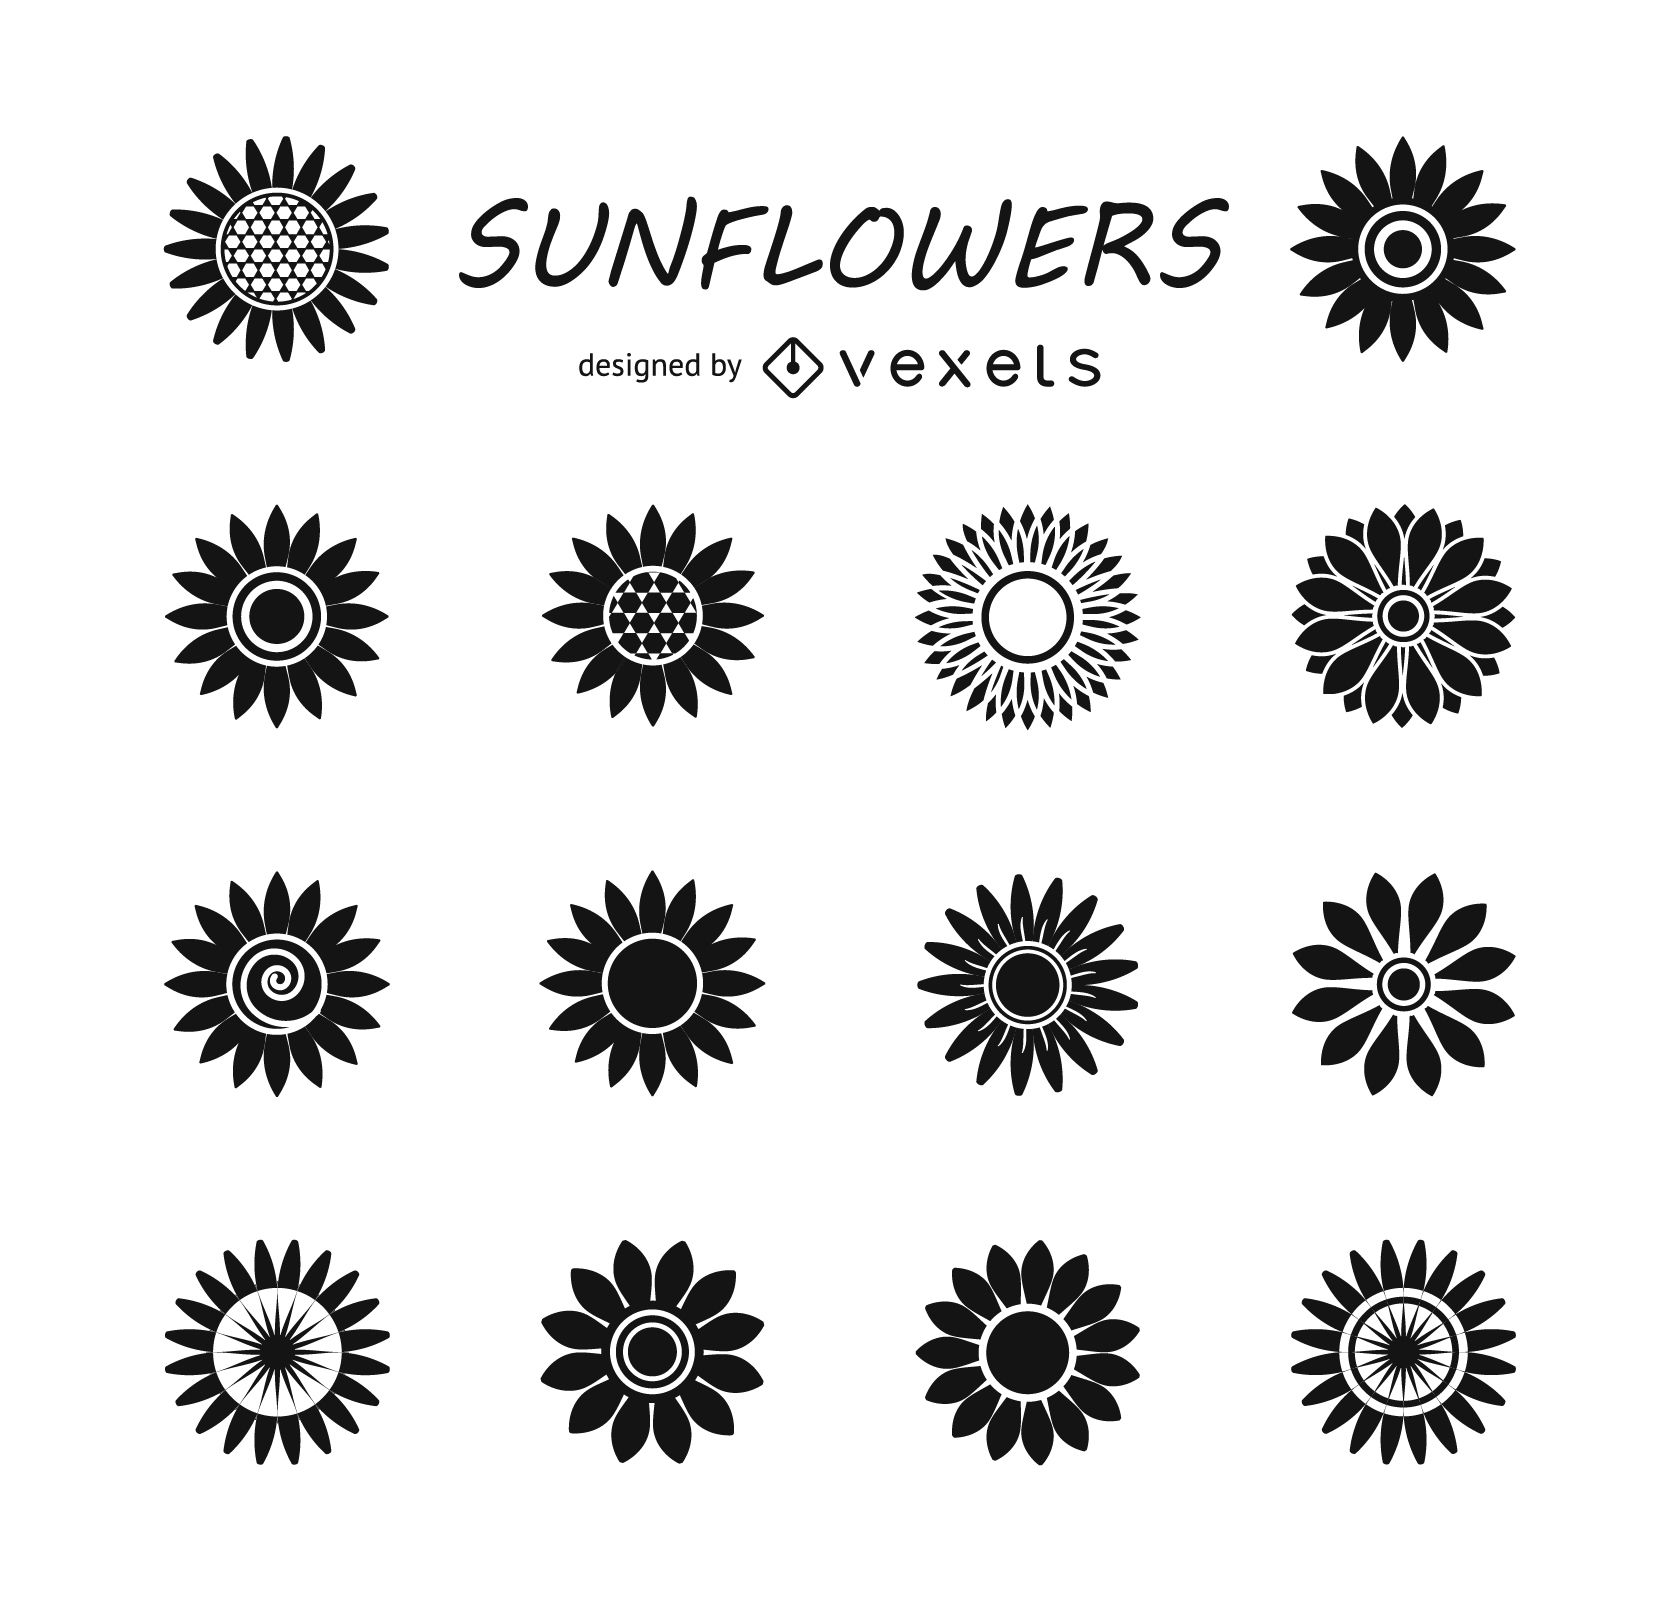 Download Free photo: Sunflower Silhouettes - Beautiful, Cool ...